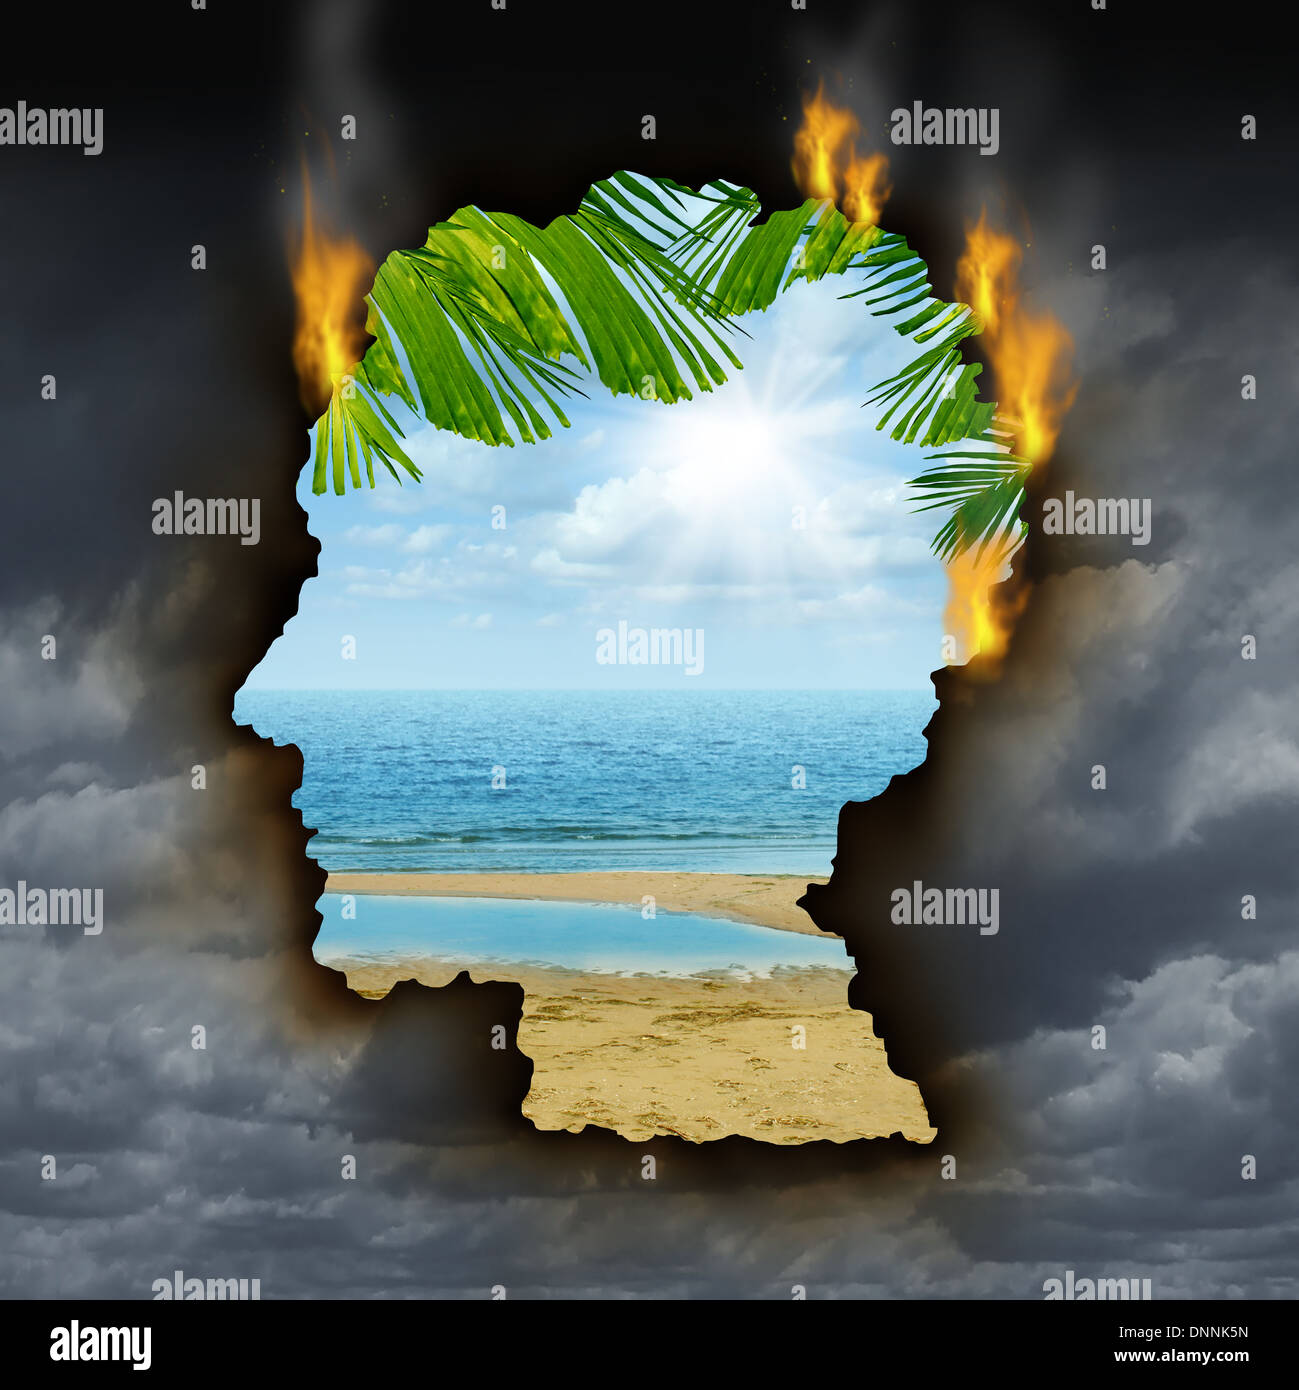 Human escape emotions and feelings concept with a dark grey storm sky burning a hole shaped as a head revealing a beautiful tropical landscape as a metaphor for brain relaxation to overcome depression stress and anxiety. Stock Photo